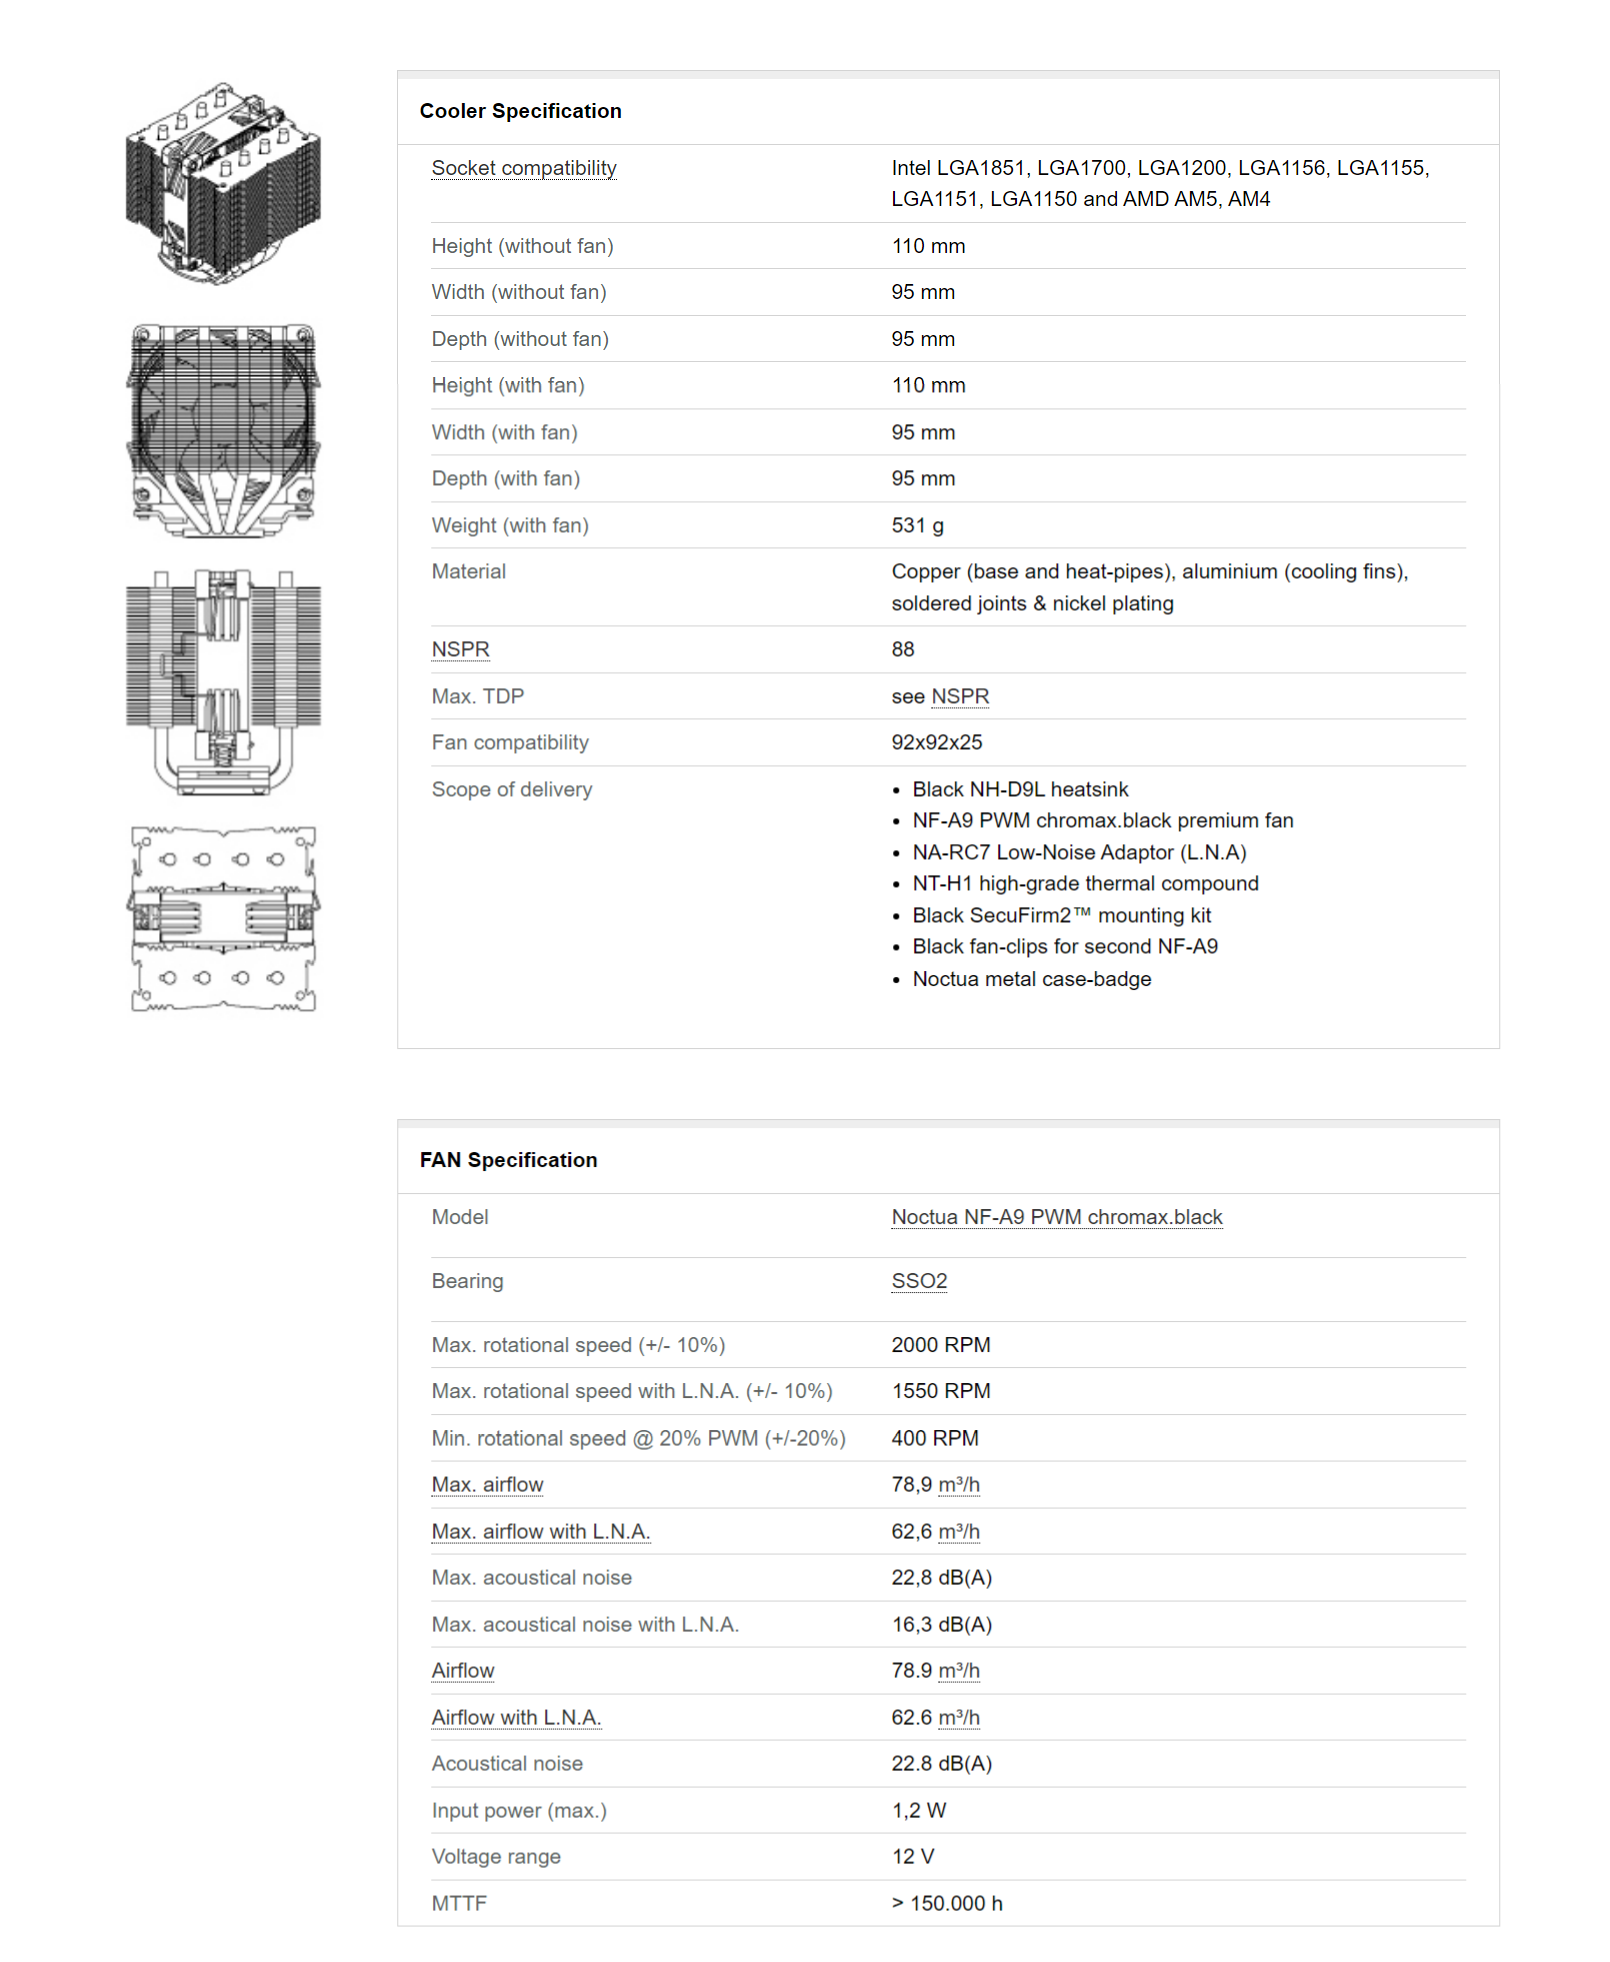 A large marketing image providing additional information about the product Noctua NH-D9L Chromax Black CPU Cooler - Additional alt info not provided